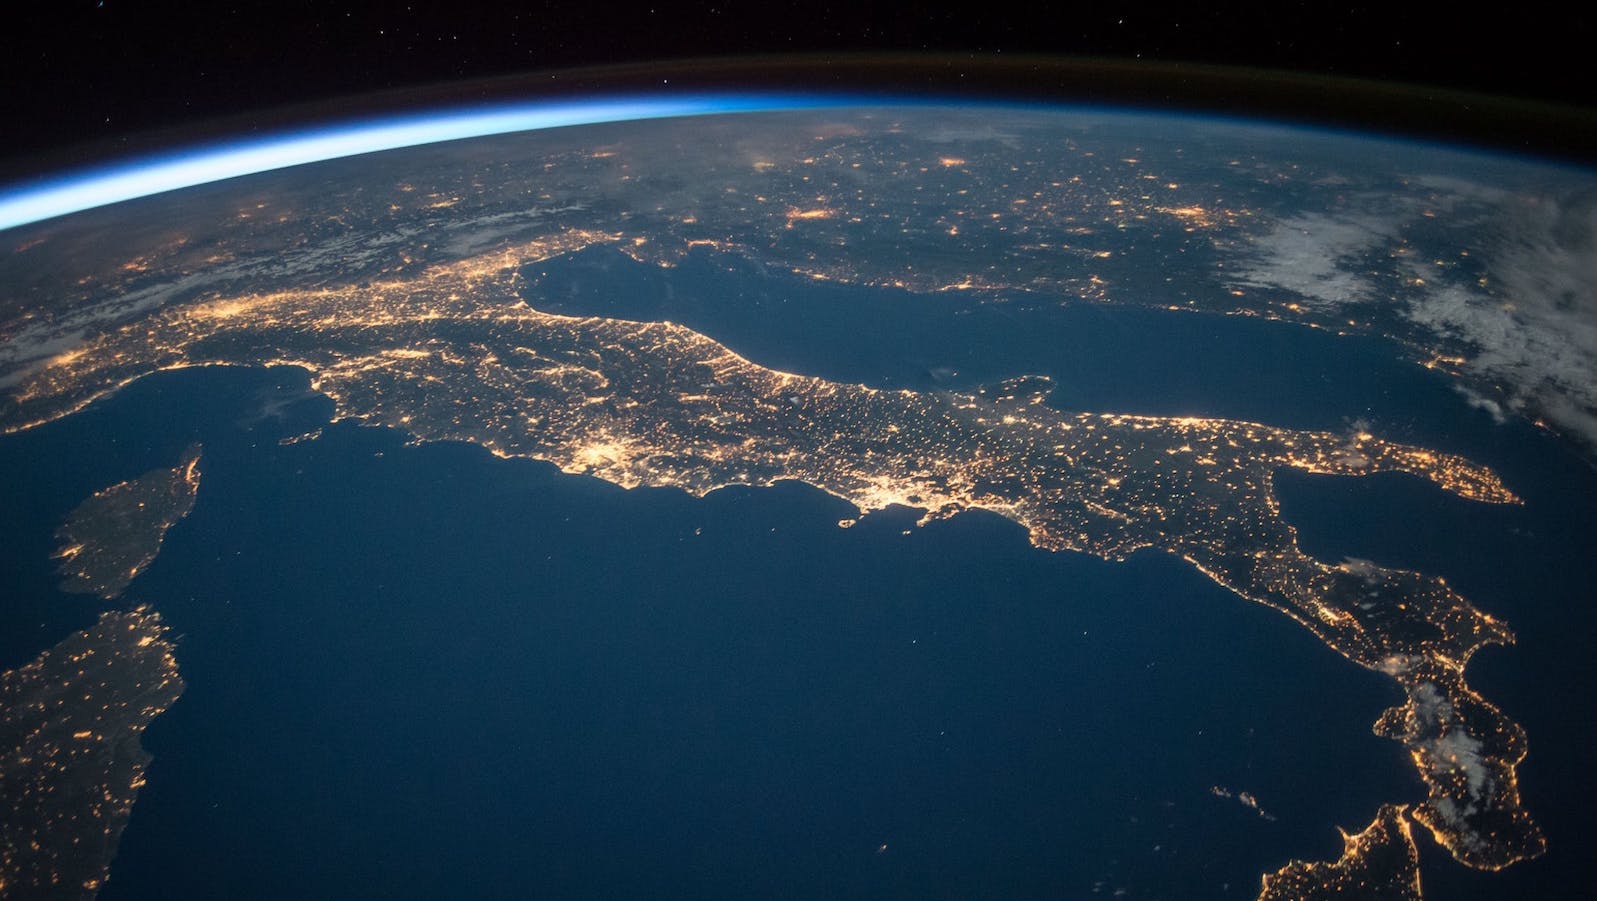 Overhead view of Earth with lights